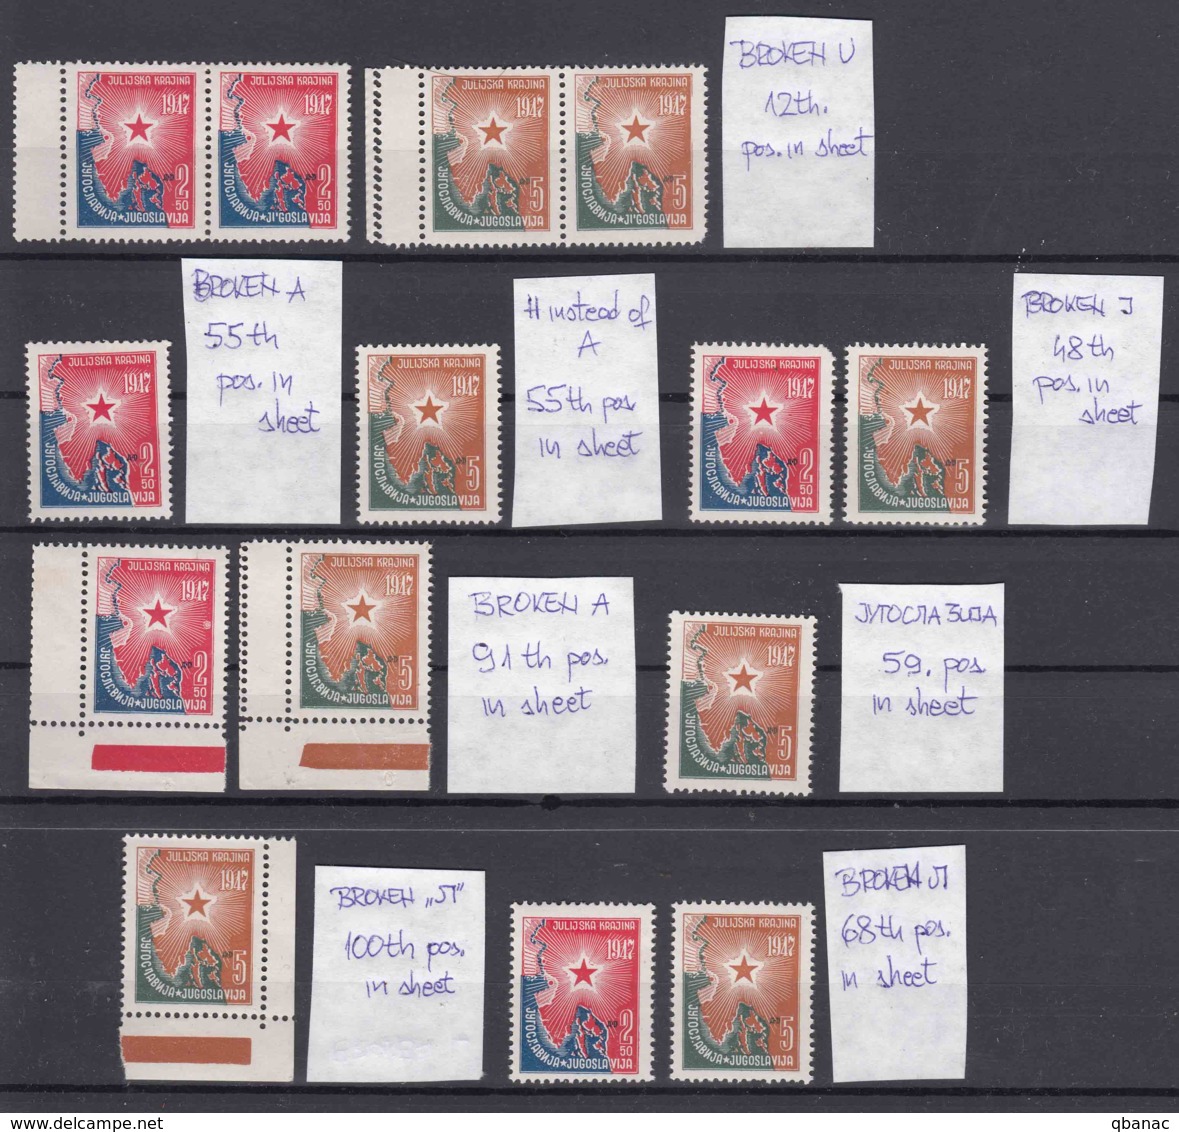 Yugoslavia 1947 Mi#527-528 With Extracted "jugosla3ija" And 11 Other Typical Errors, Described Positions, Mnh - Ungebraucht